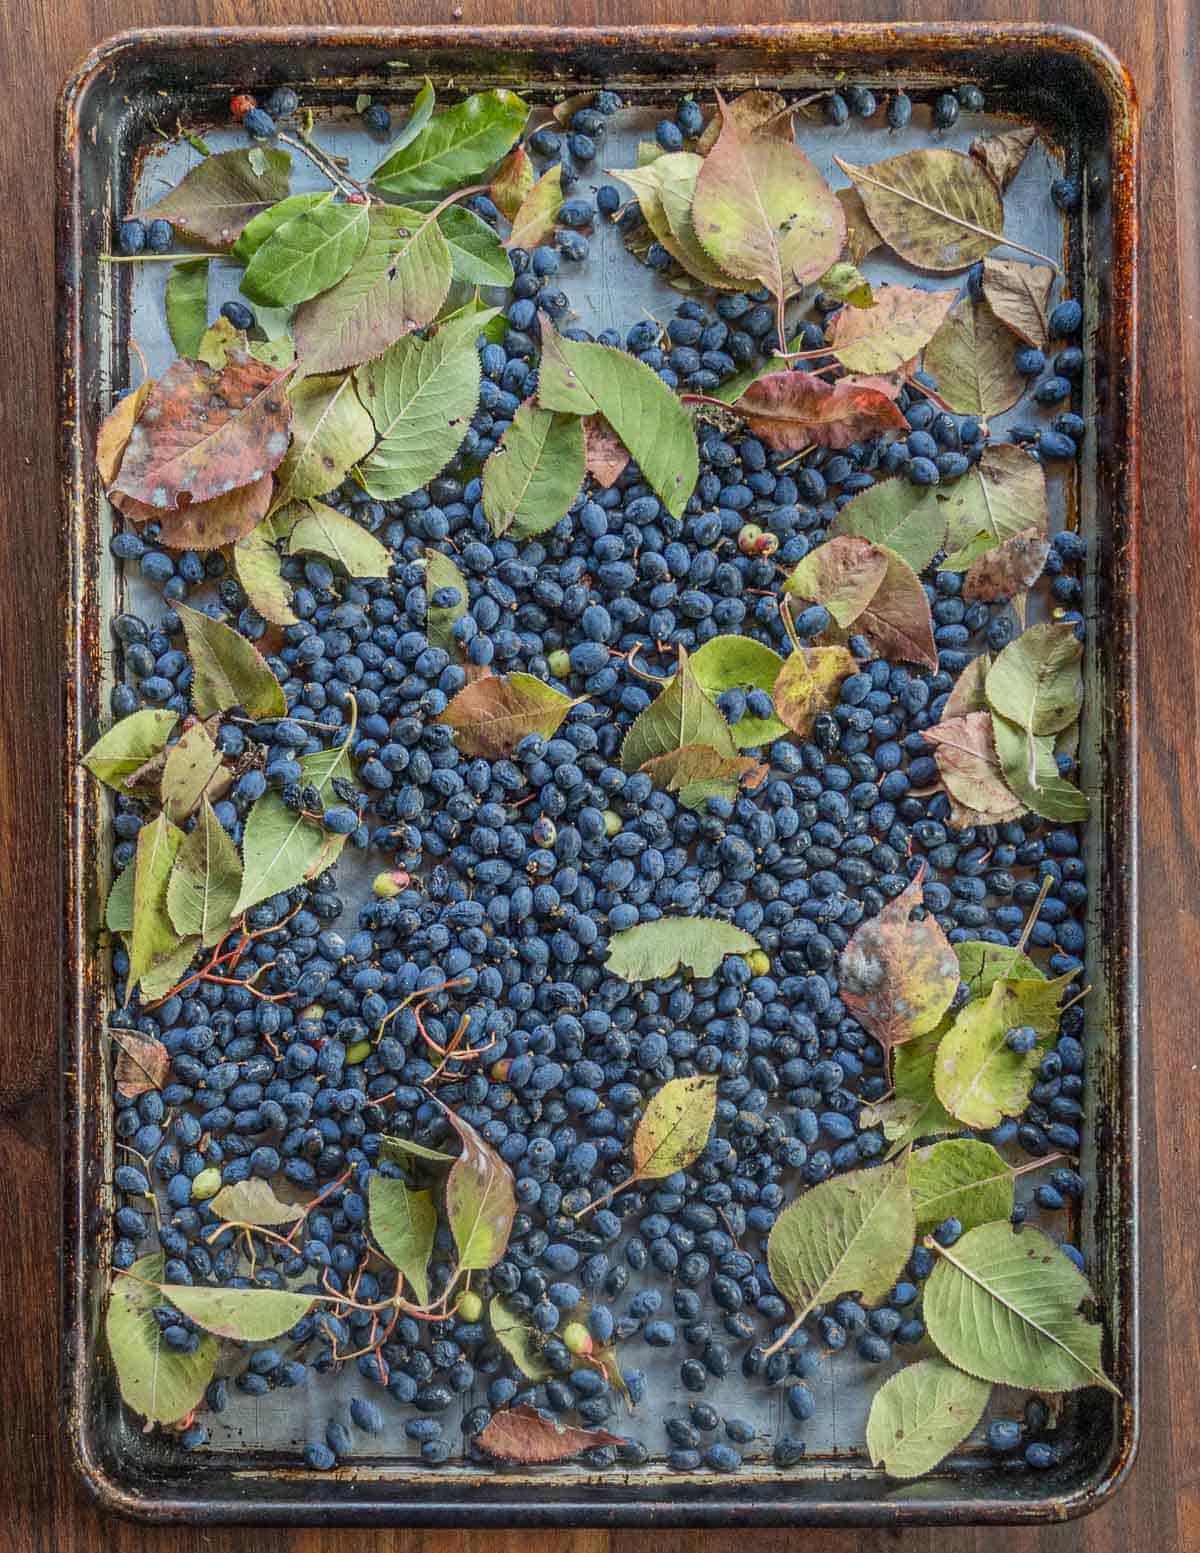 A baking sheet filled with nannyberries, stems and leaves before cleaning. 